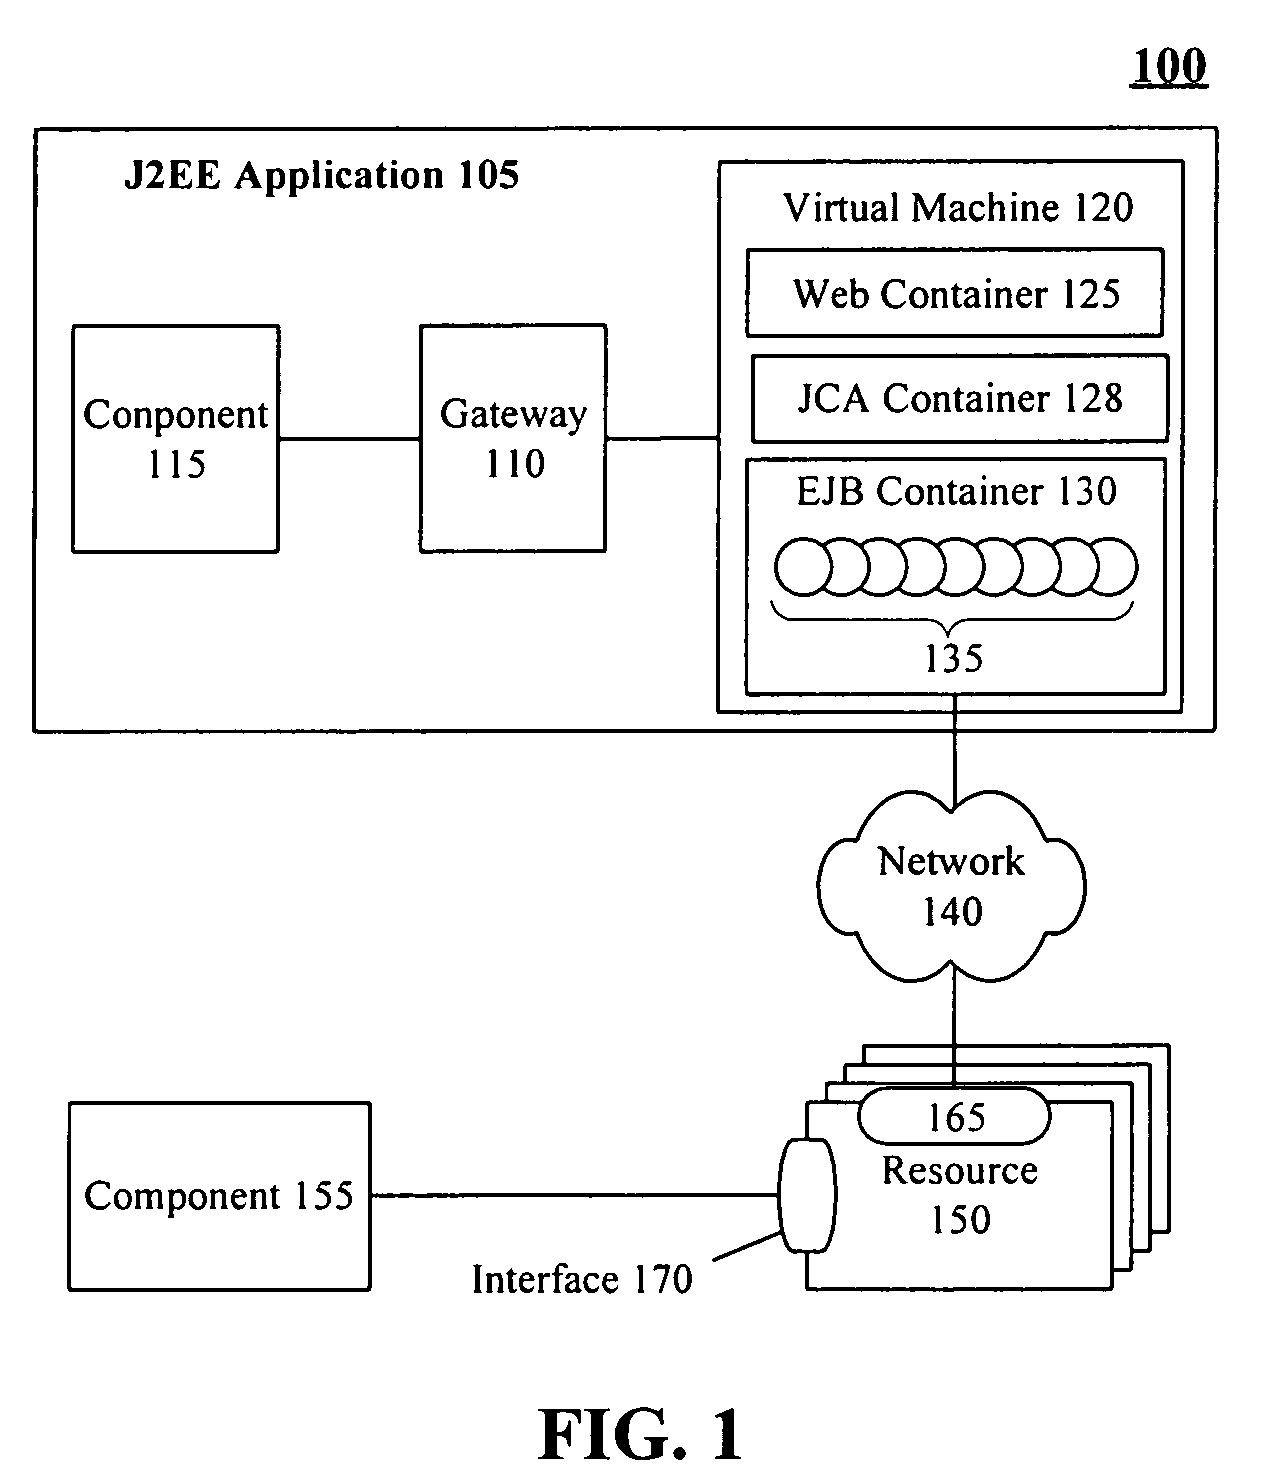 Interfacing an application server to remote resources using Enterprise Java Beans as interface components